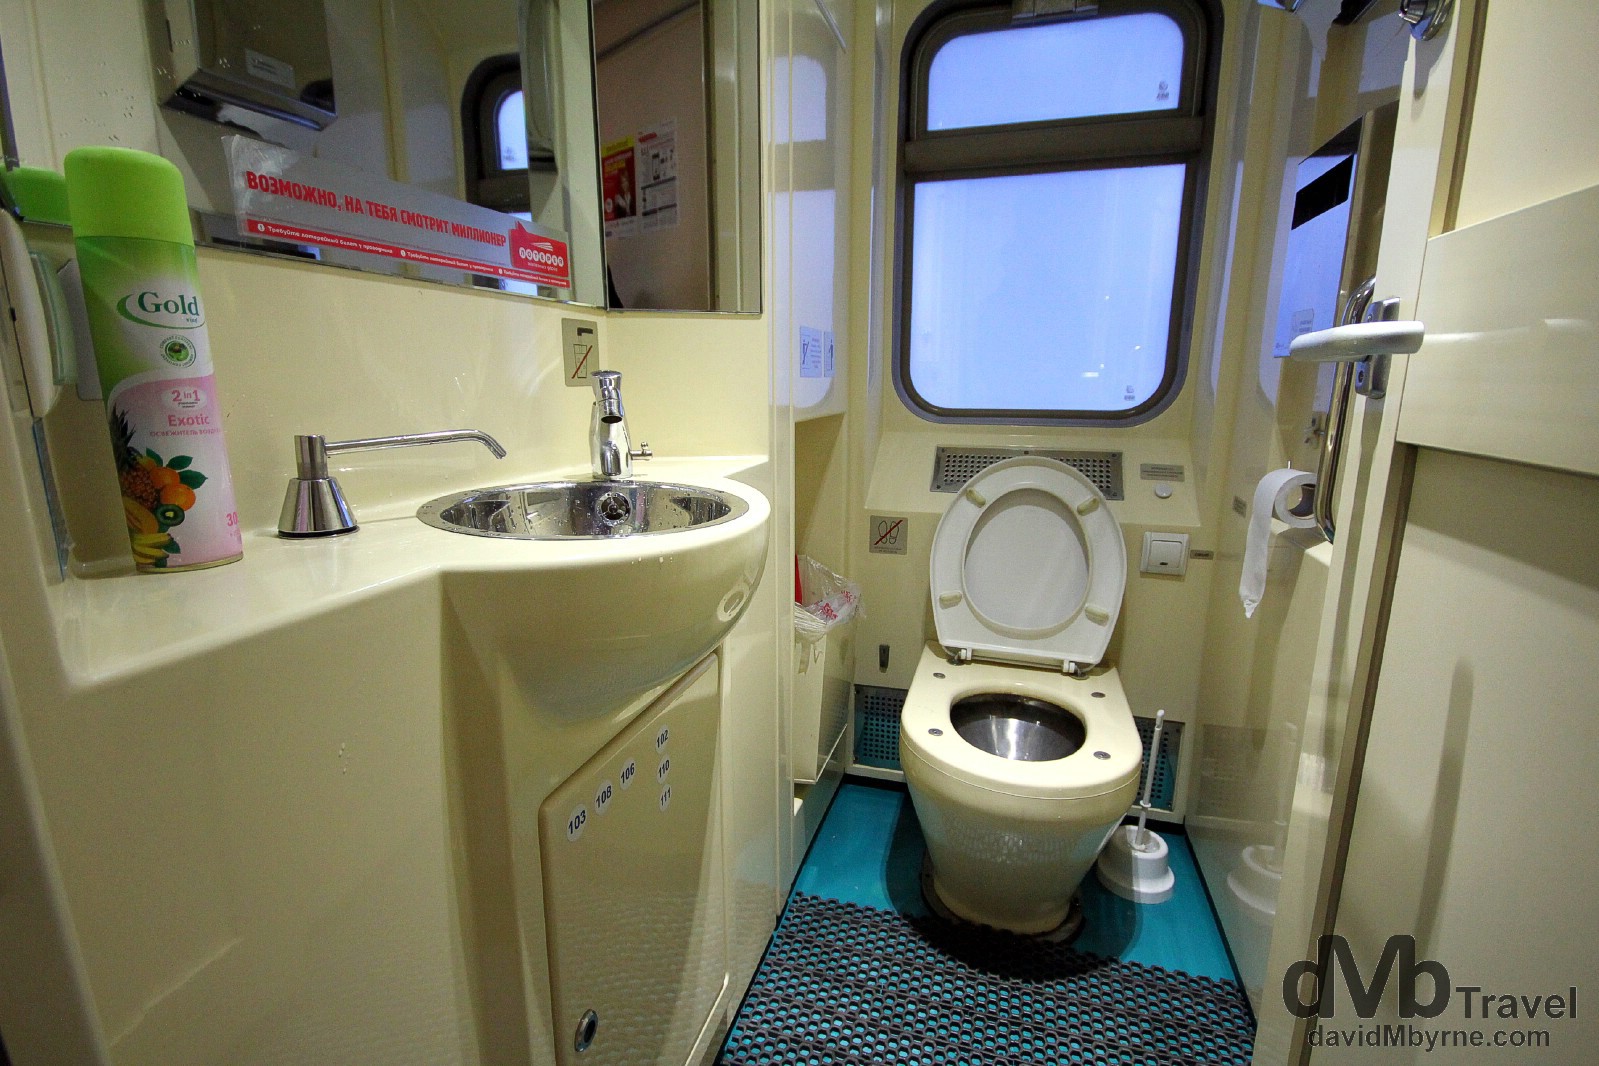 Yes, it's a toilet, the one at the end of my train carriage. Everything is clean & works. And there’s even air freshener. The toilet is one of those noisy suction jobs found on aeroplanes meaning, & unlike older rolling stock which simply discards whatever is deposited right onto the tracks, toilets are not locked in the vicinity of stations. Nirvana for some. On the train from Tomsk to Nizhny Novgorod, Russia. November 14th 2012.